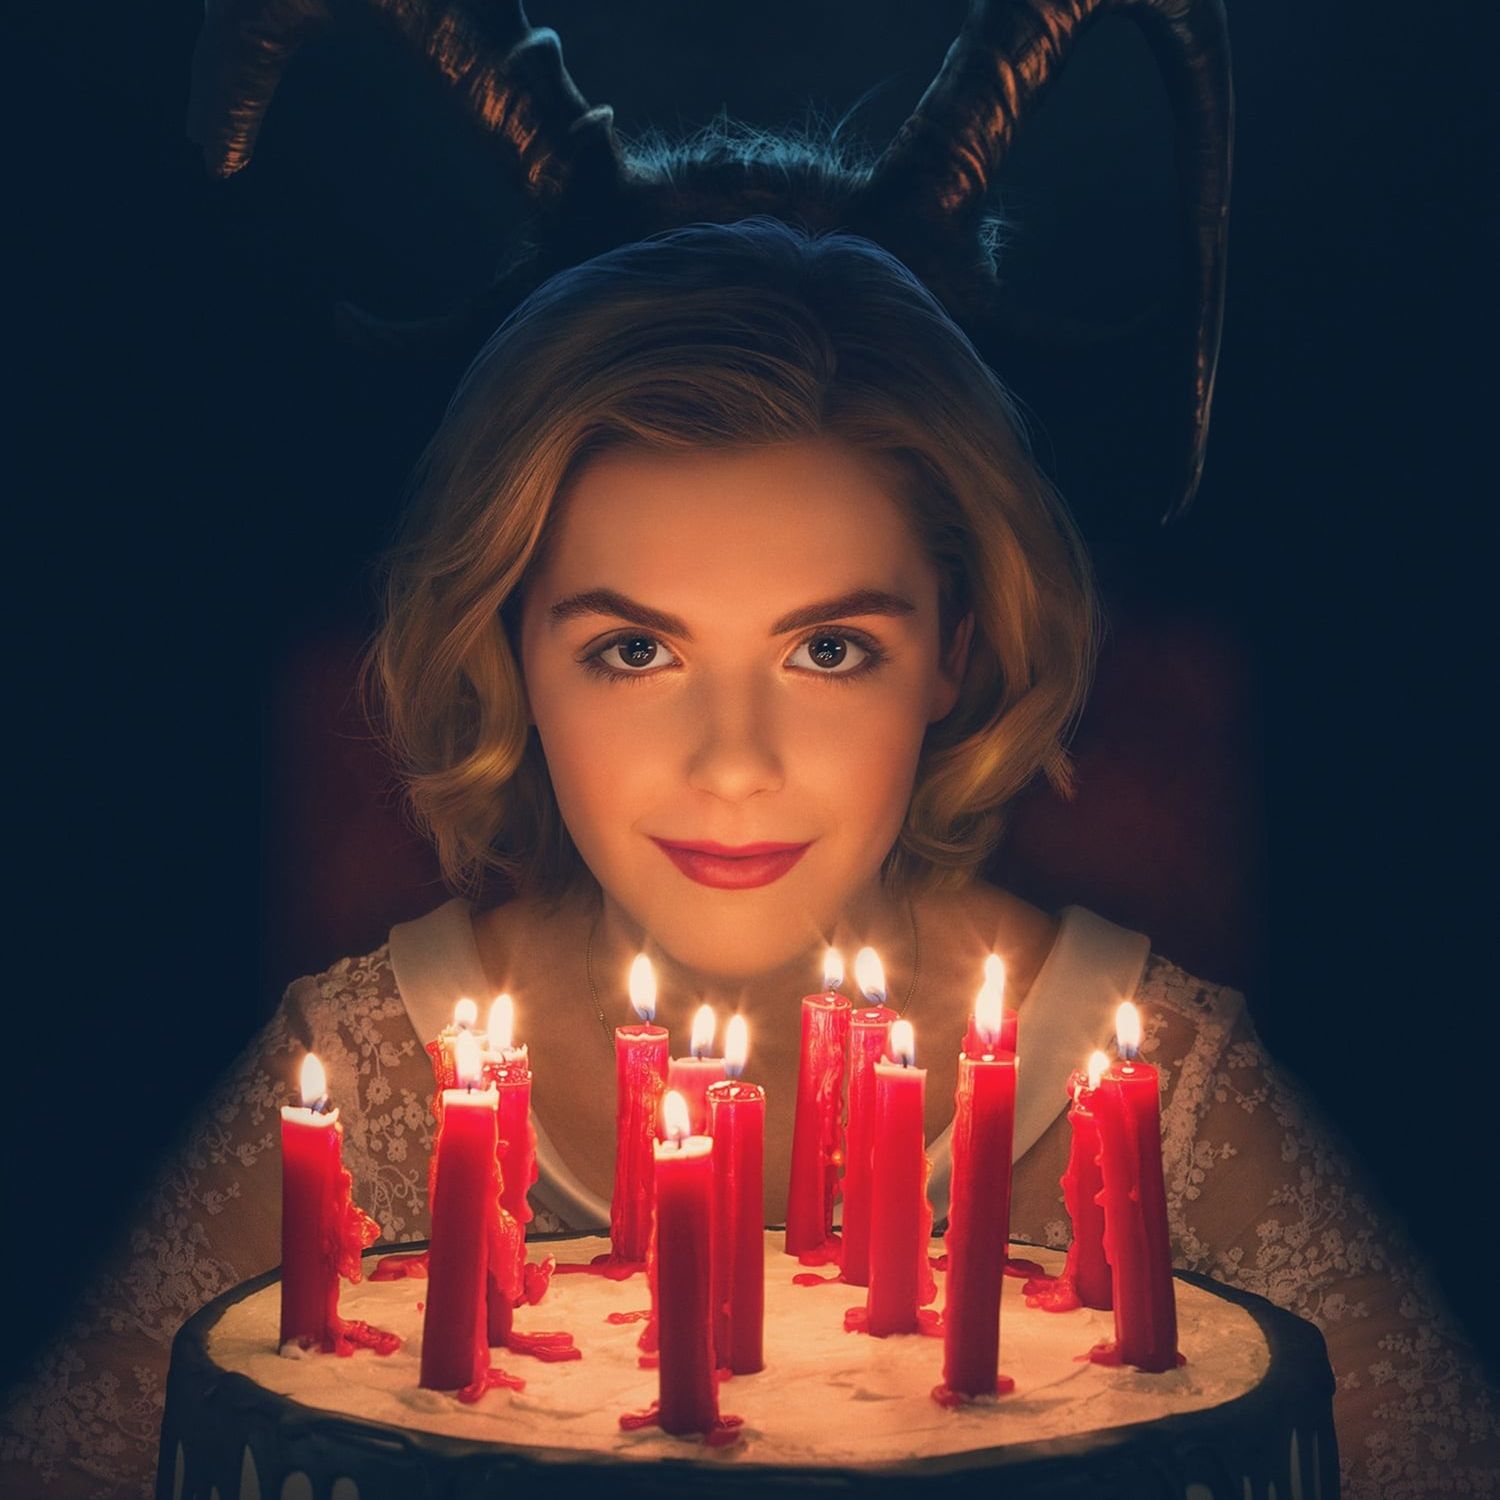 chilling adventures of Sabrina